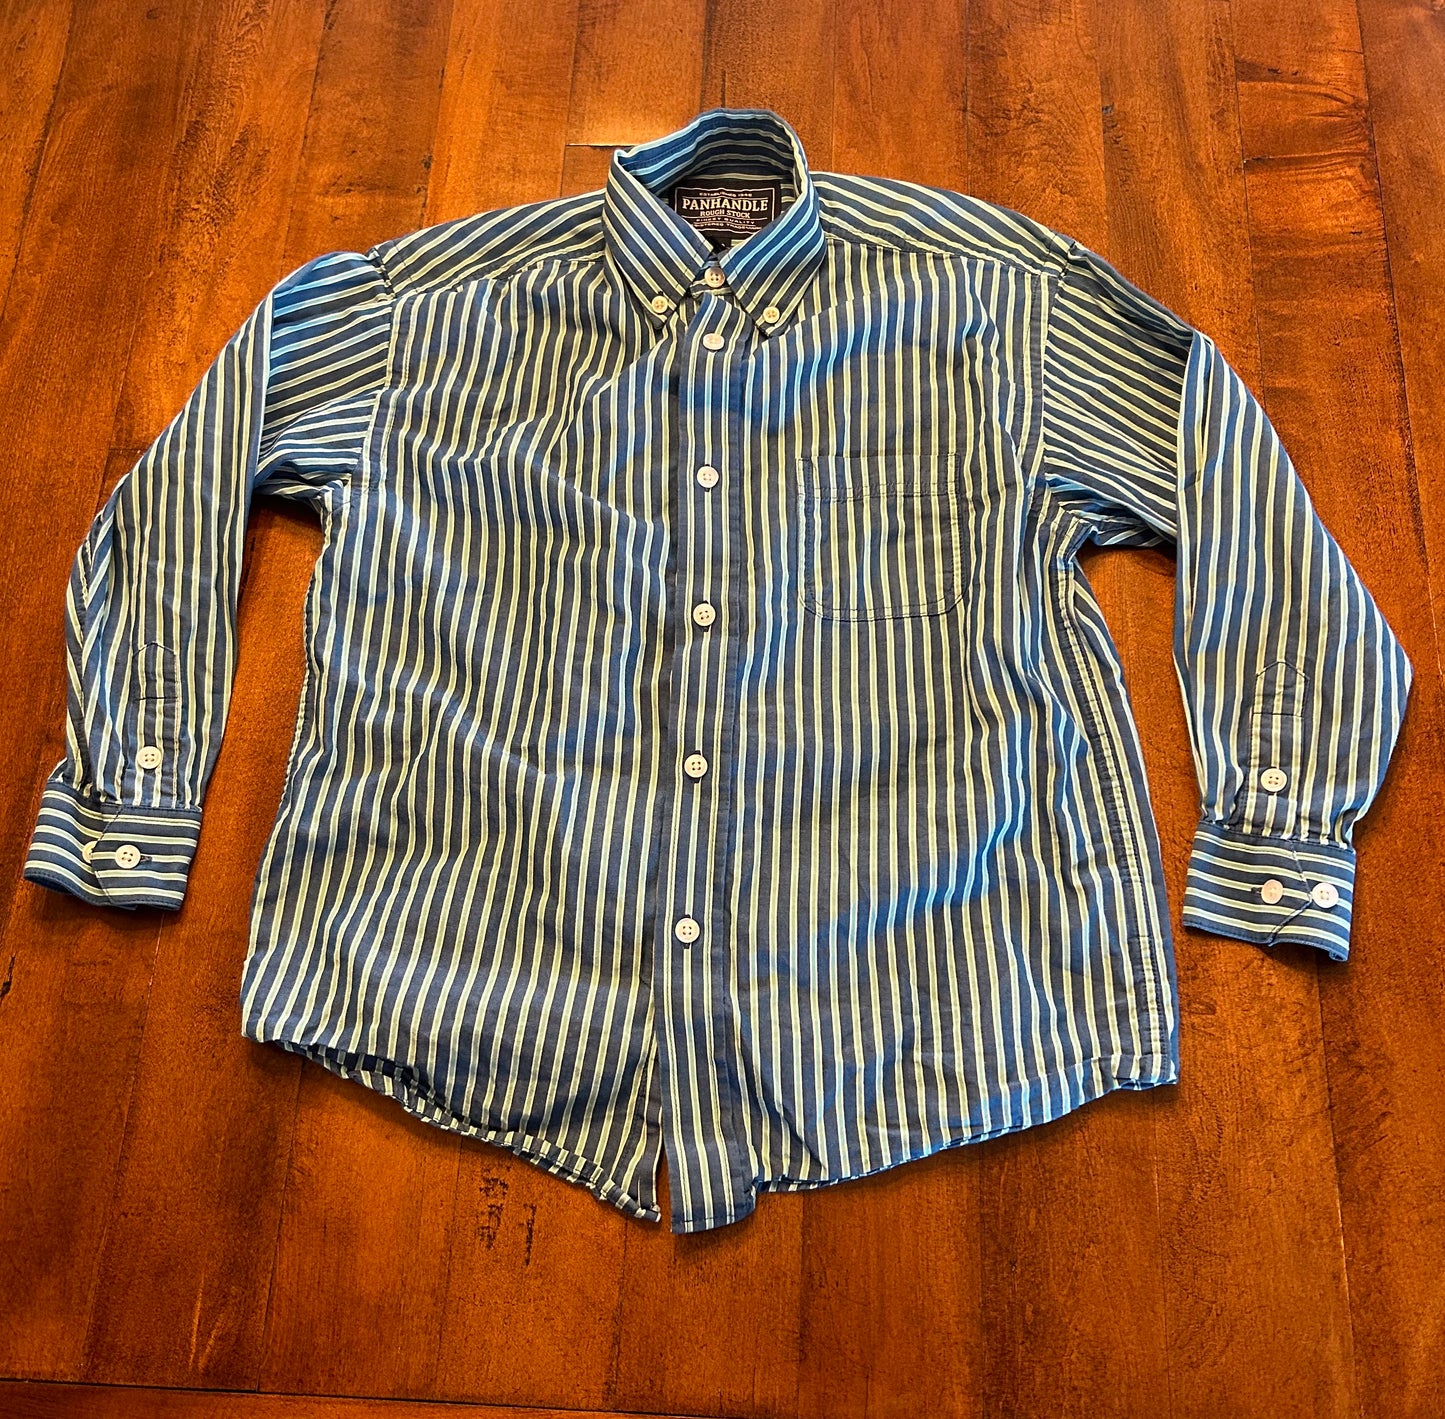 Panhandle Rough Stock Button Up Kid’s Size M/10